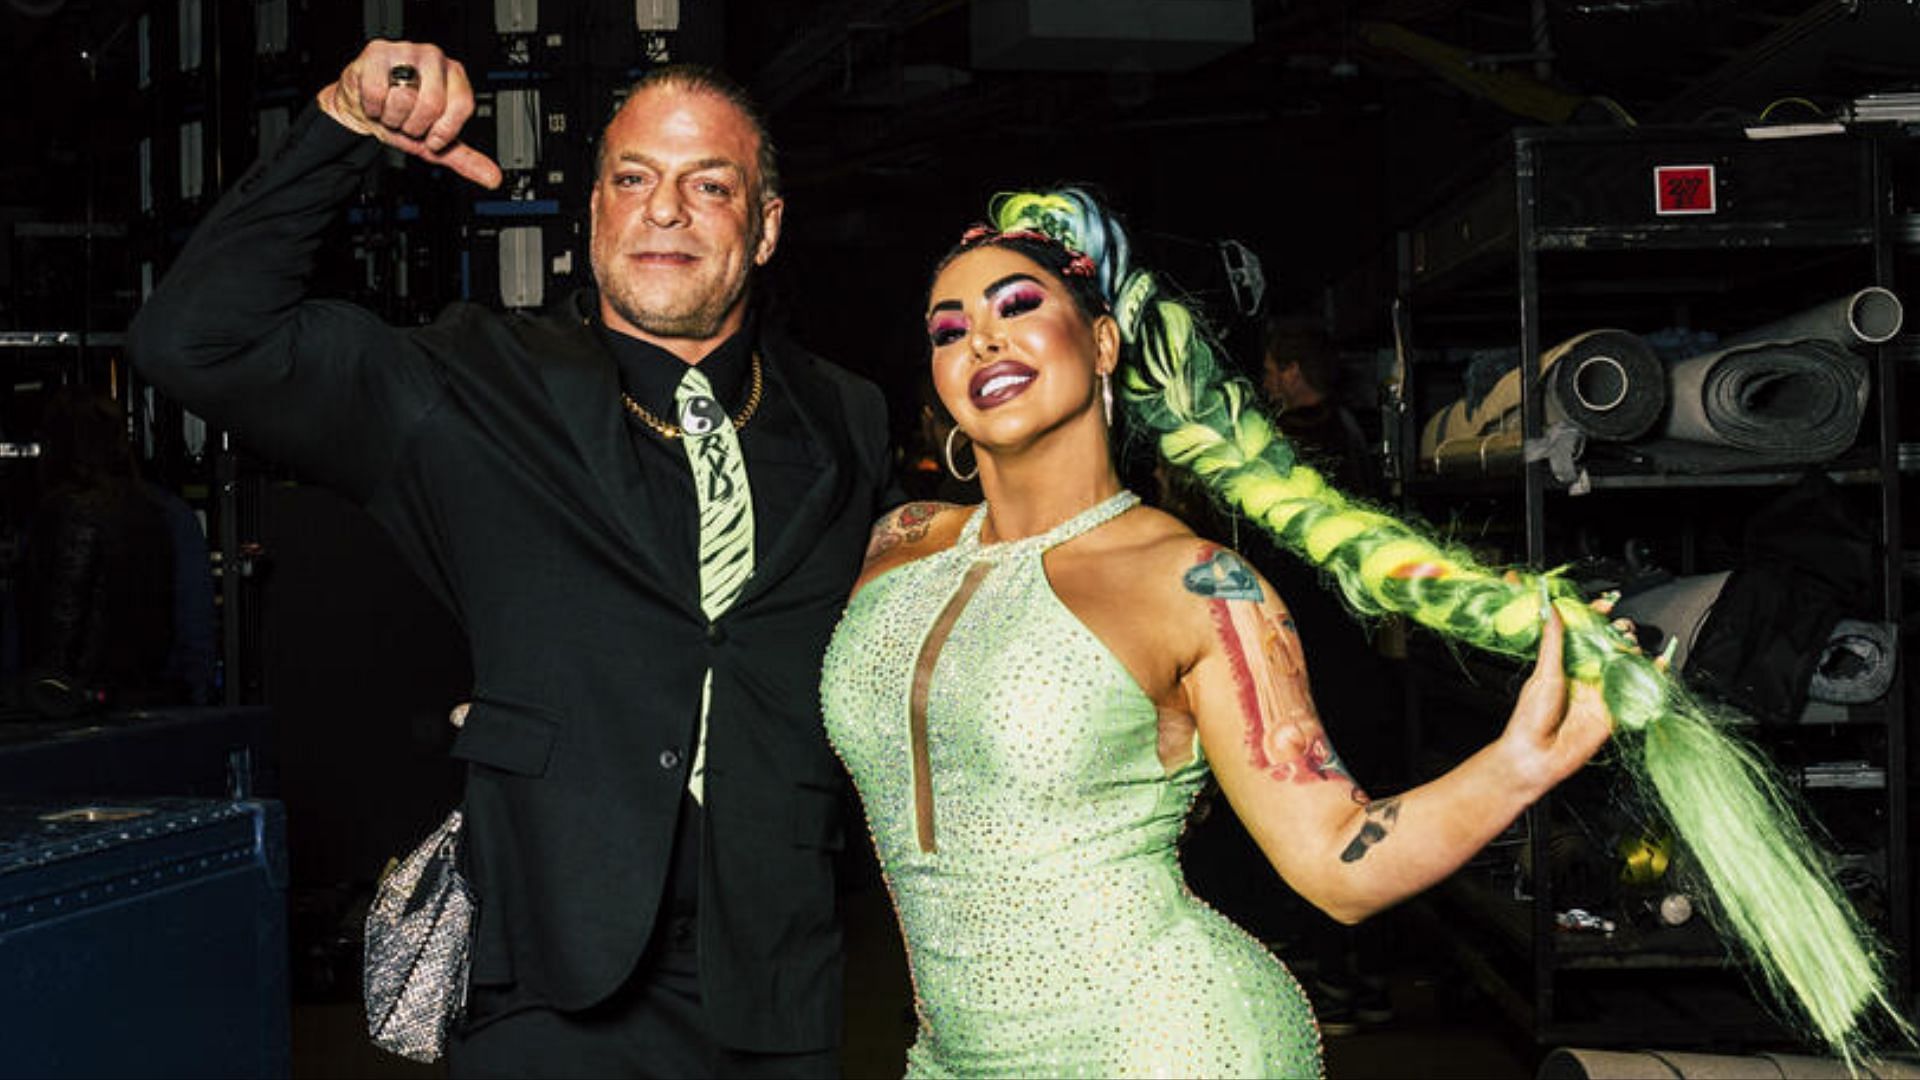 Rob Van Dam and wife Katie Forbes behind the scenes at WrestleMania XL (Credit: WWE)